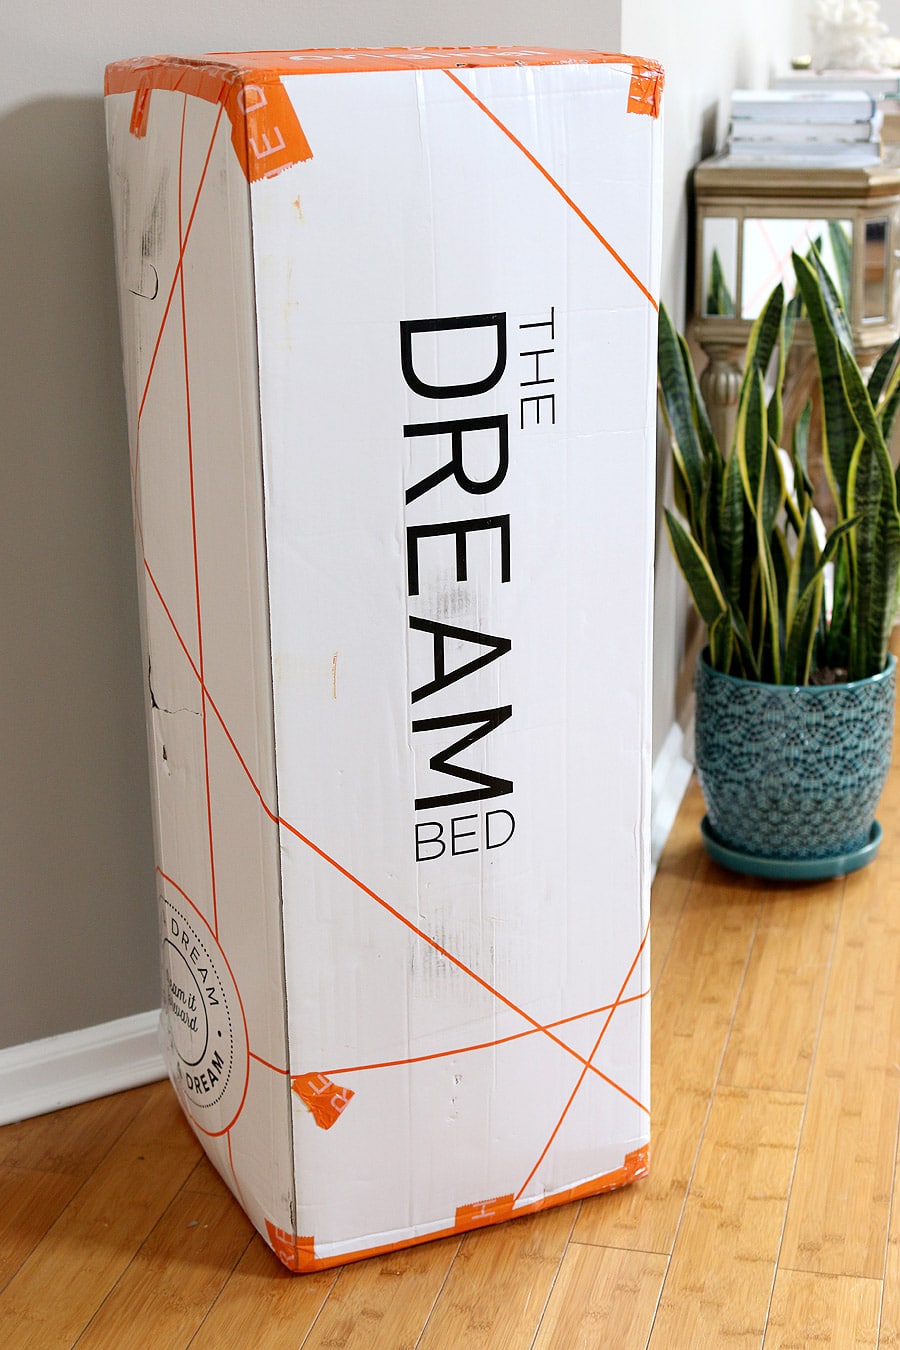 The Dream Bed - a bed in a box